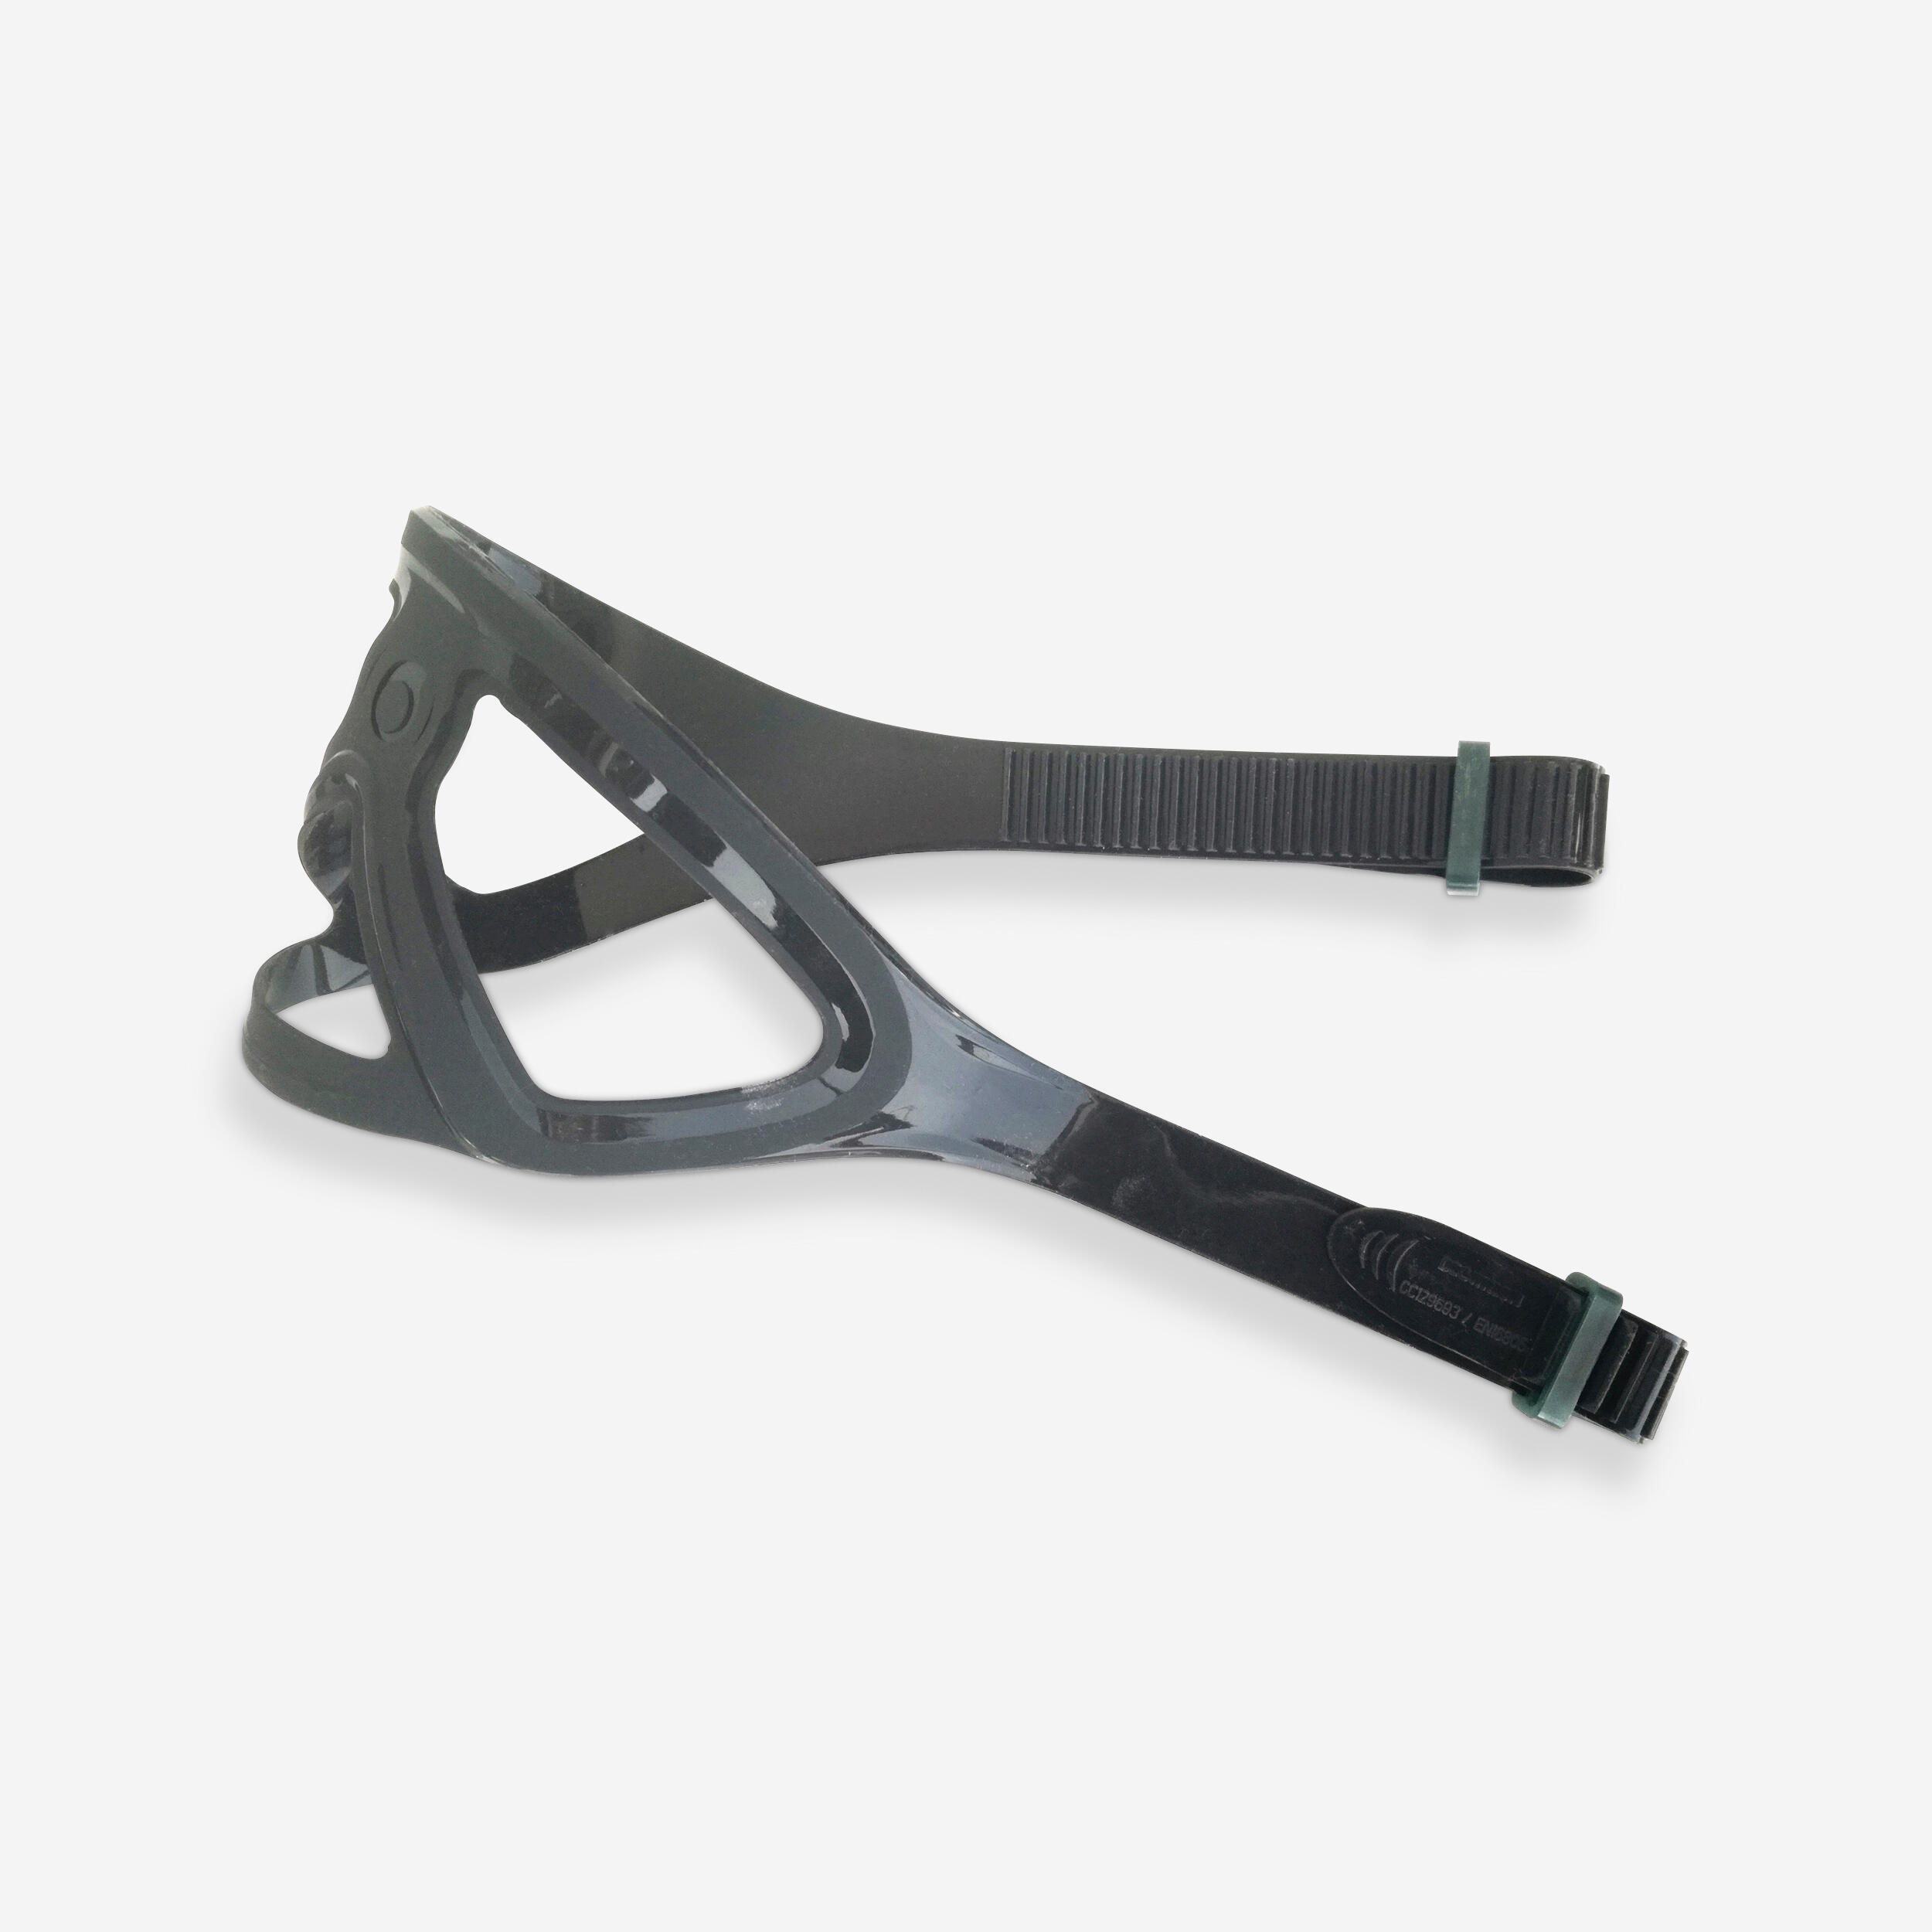 SUBEA Black free-diving, spearfishing mask strap